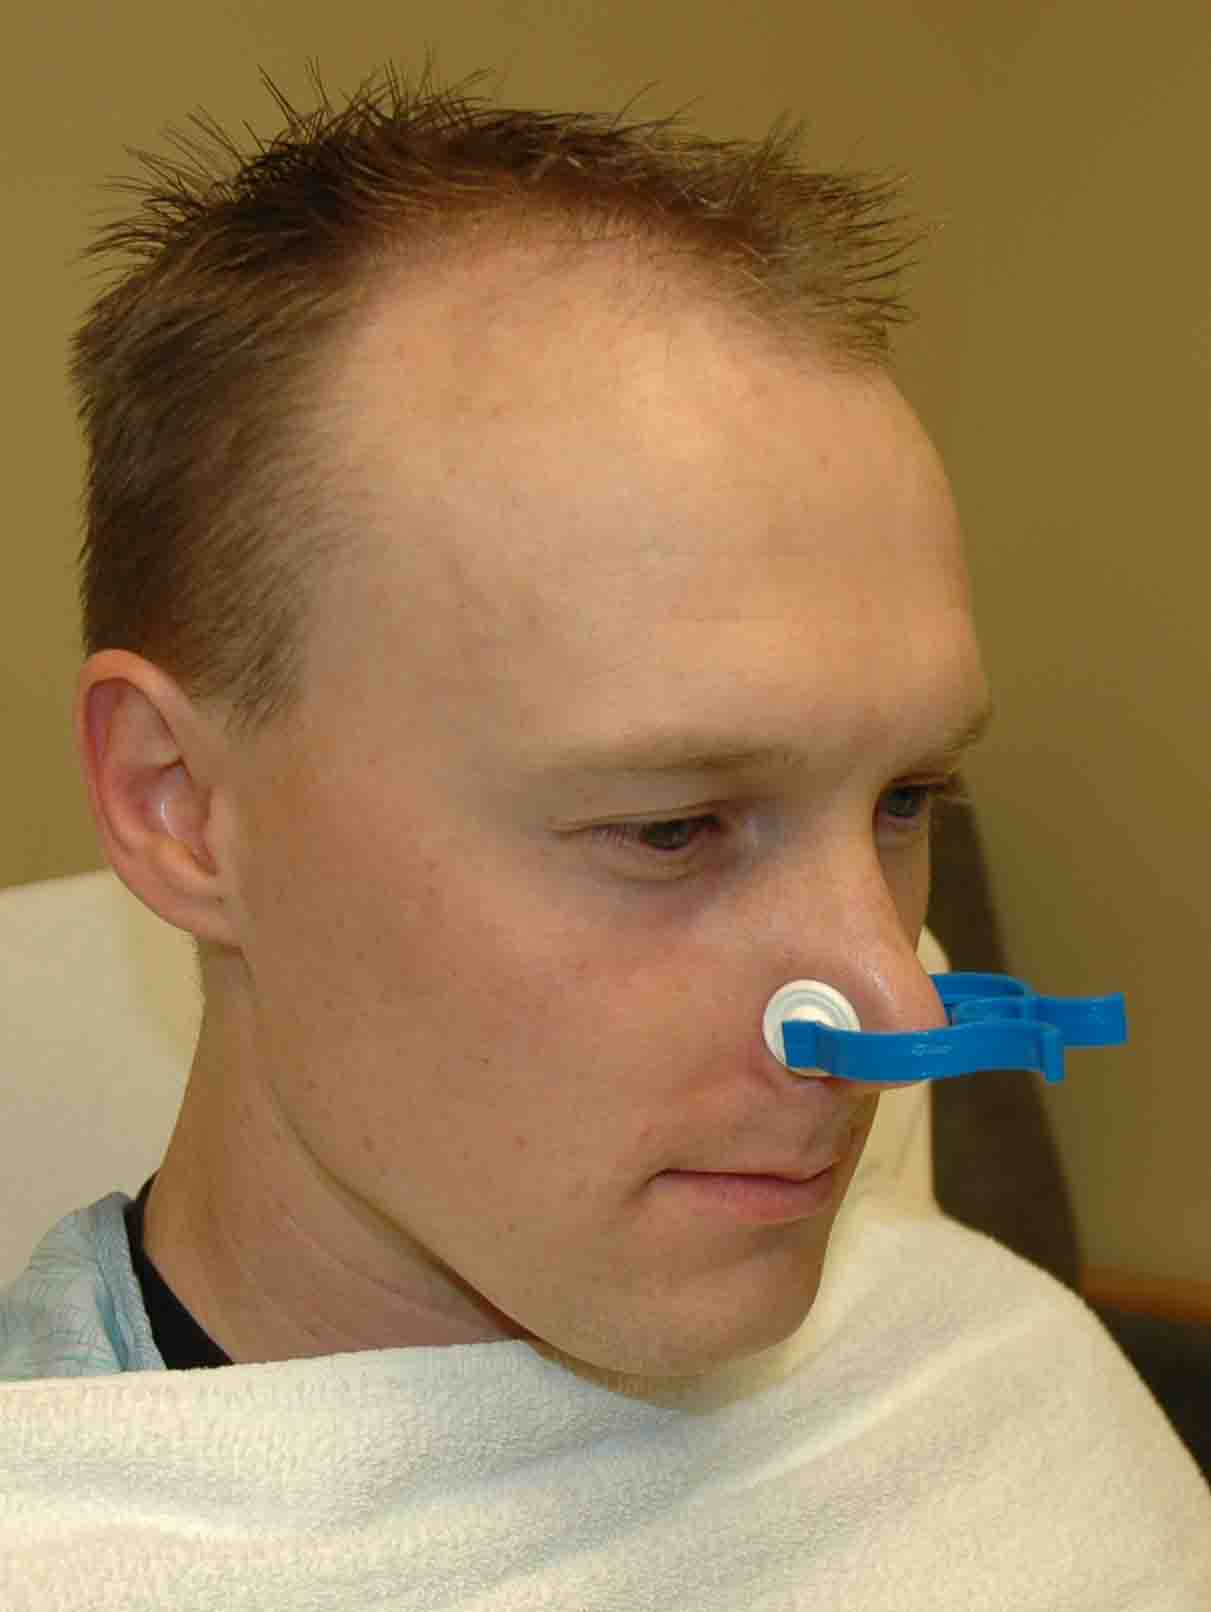 Clamp nose for 15 mintues with oxymetazoline spray and soaked cotton ball inside the nostril